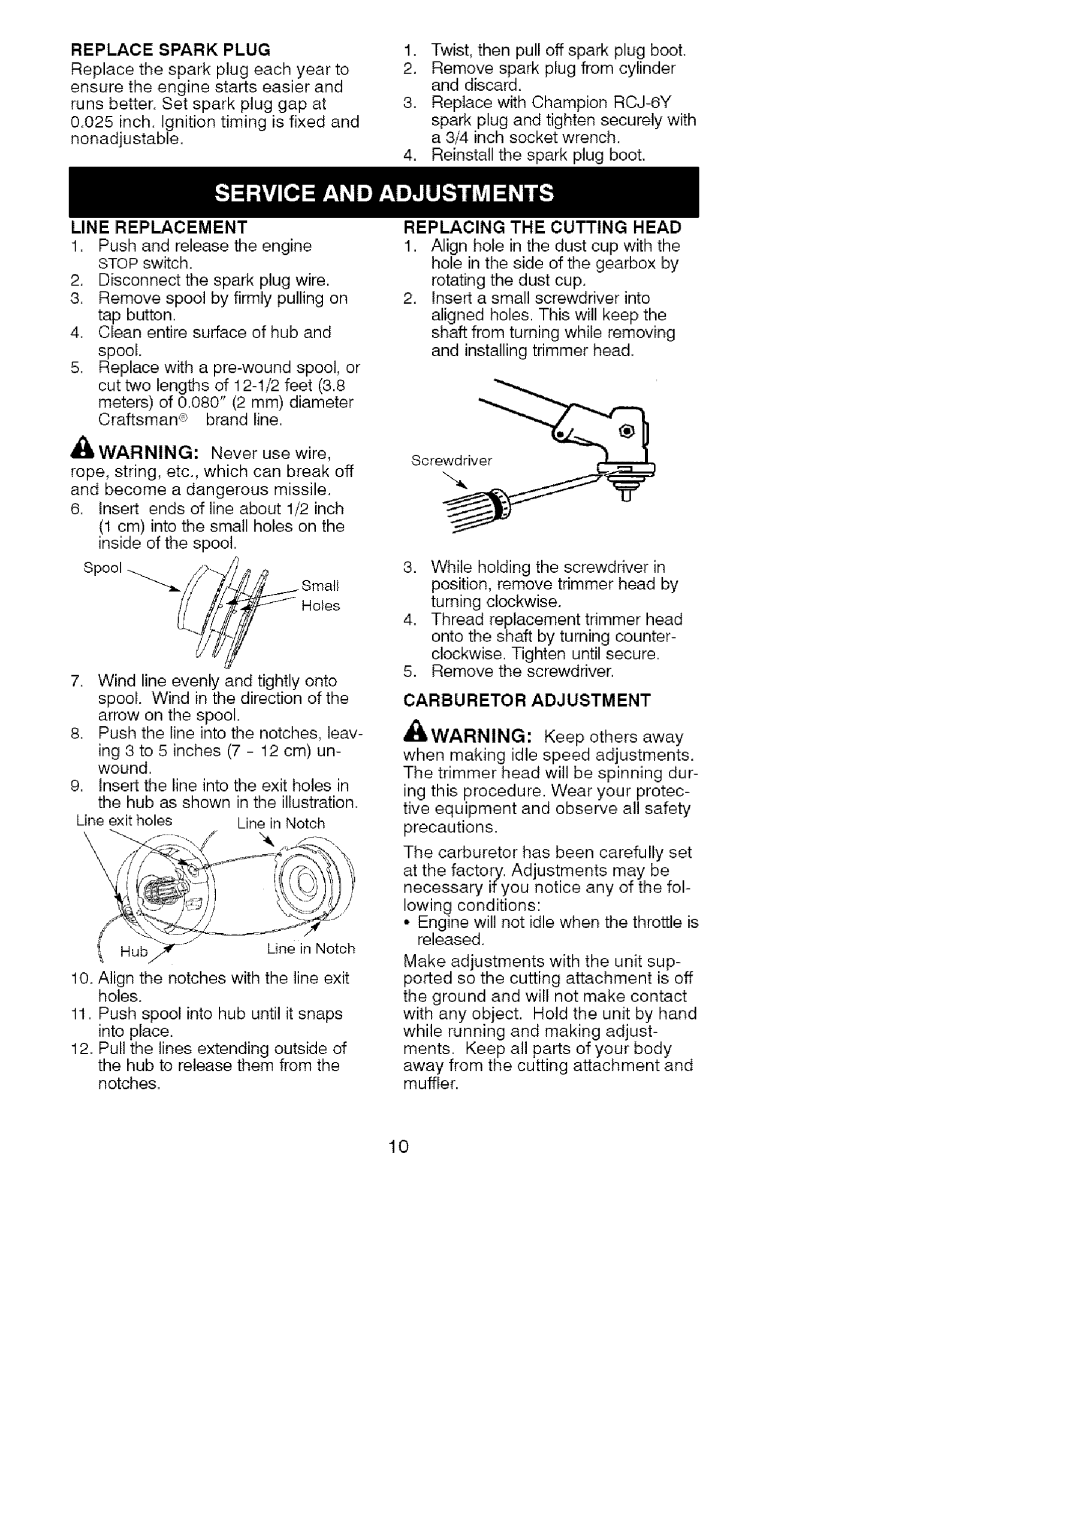 Craftsman 358.79101 instruction manual ZqWJ /sma, Ho,es, if St, Replace Spark Plug, Line Replacement, Keep others away 